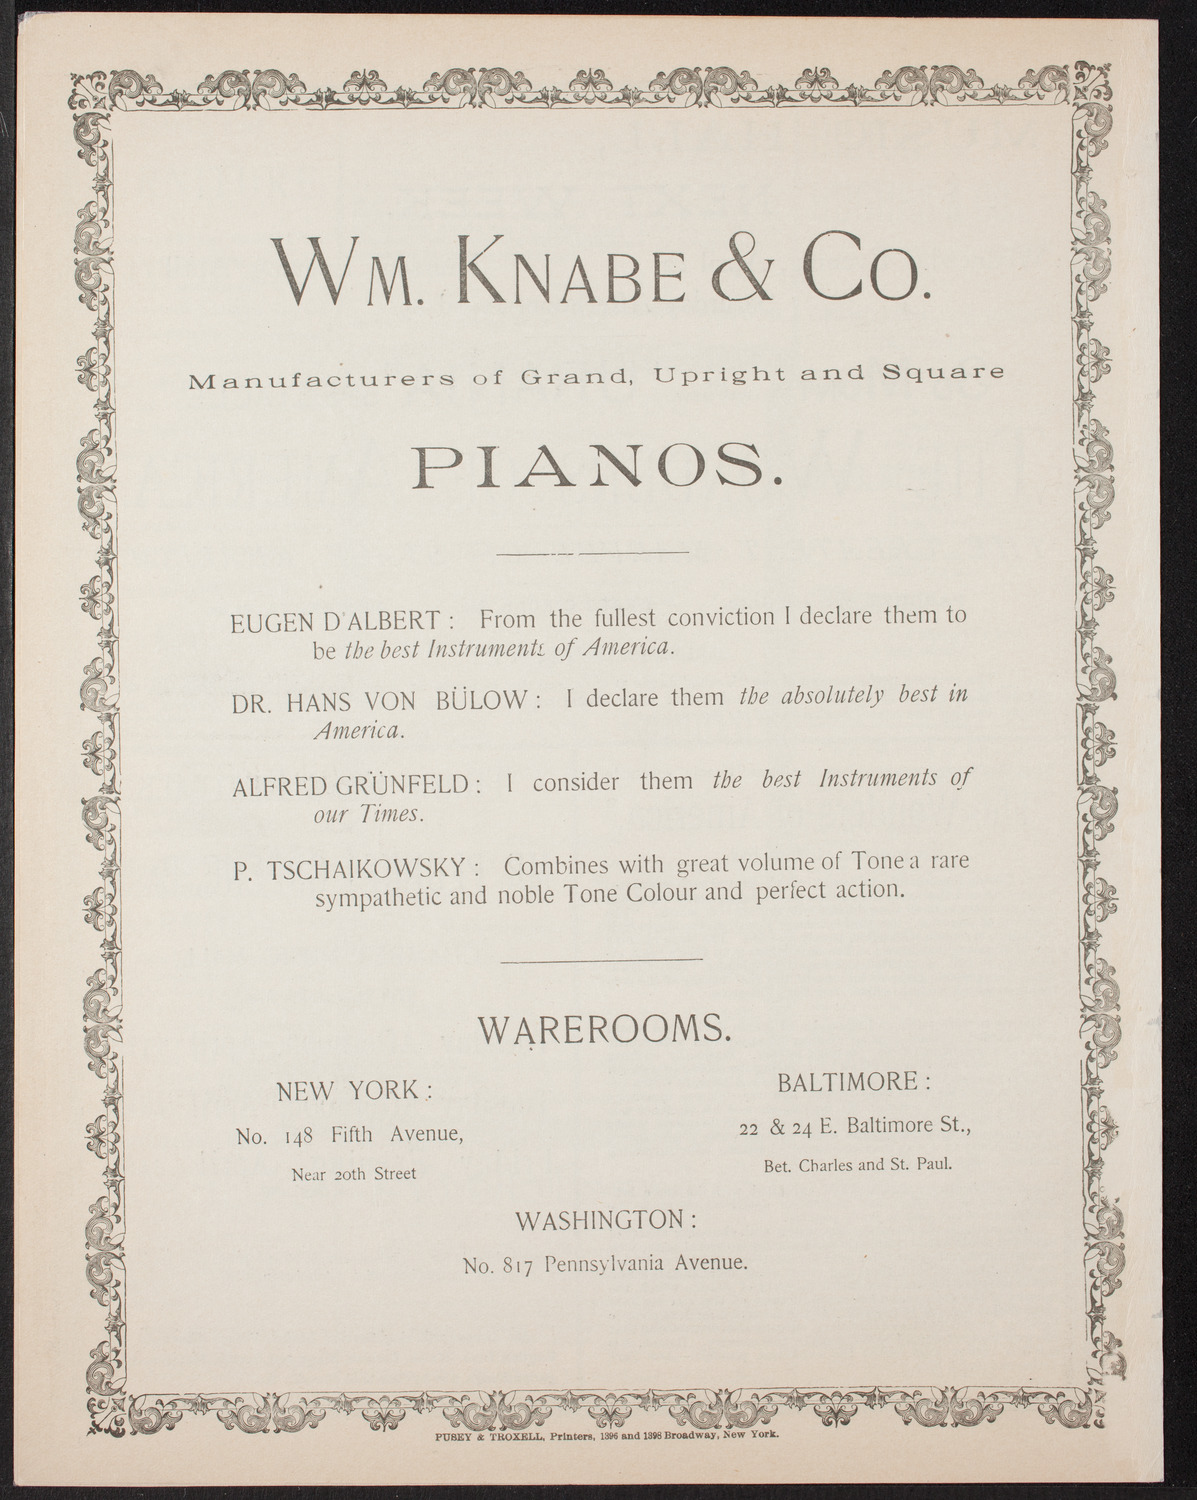 Grand Wagner Concert/ Benefit: Italian Mission, Church of San Salvatore, April 7, 1893, program page 8